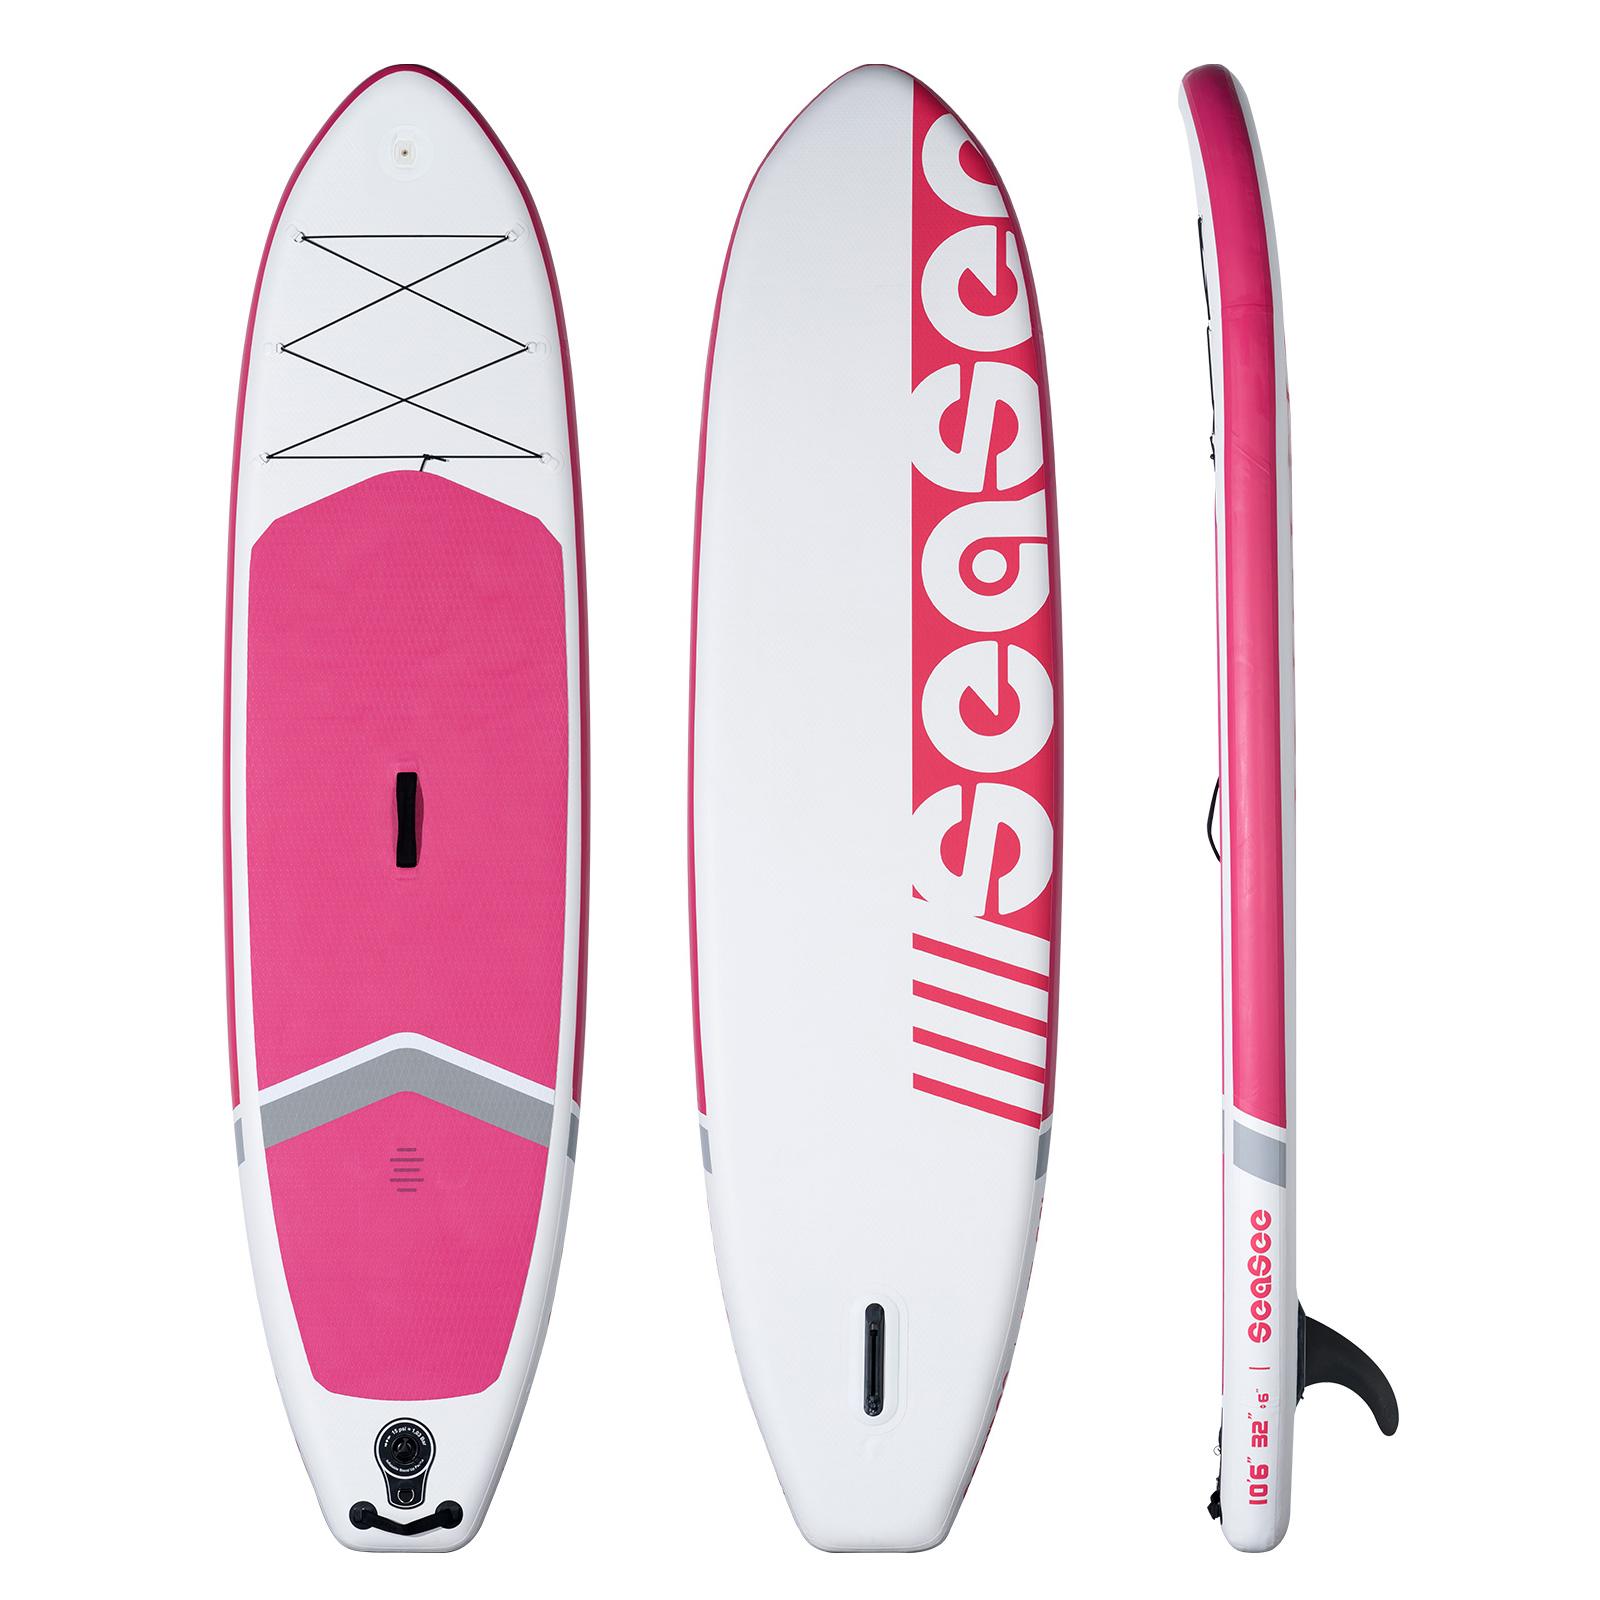 Seaseesup Stand Up Paddle Board 10'6 #PINK WHITE